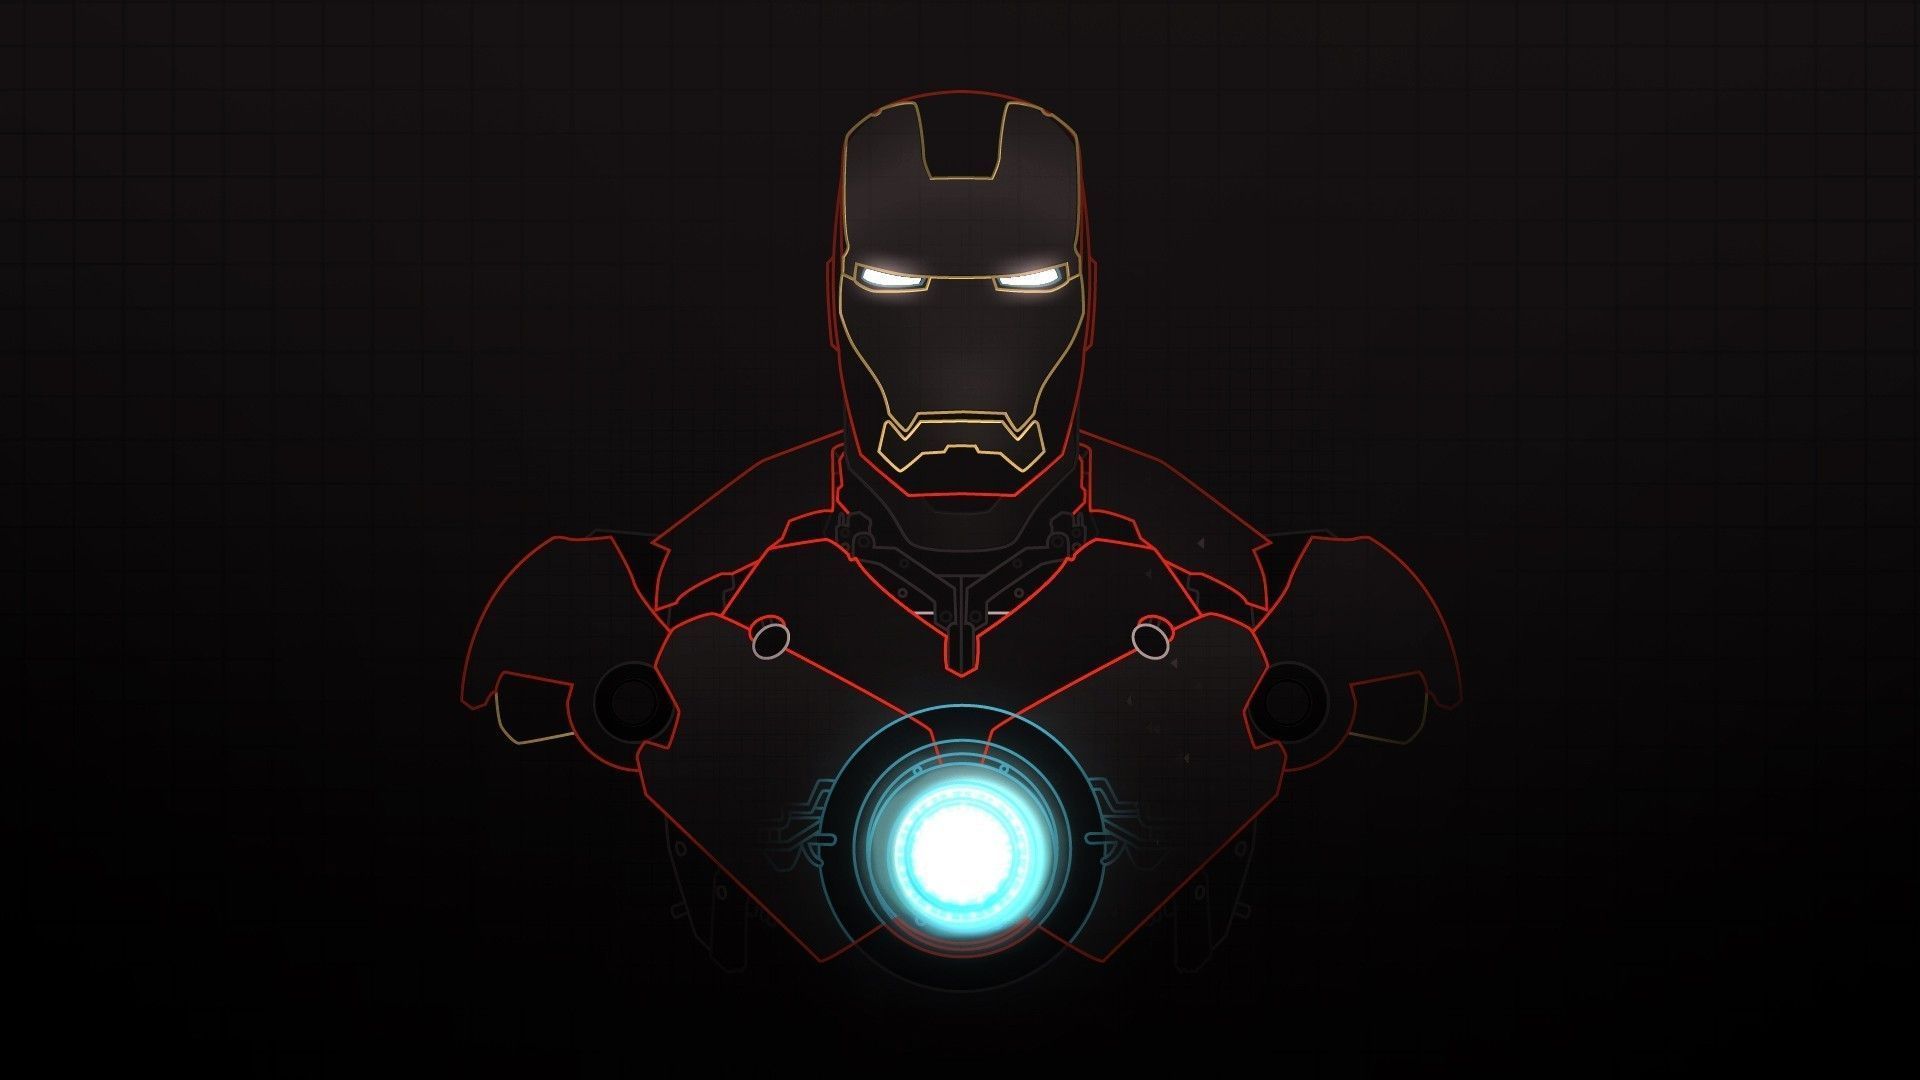 35 Iron Man HD Wallpapers for Desktop - Page 3 of 3 - Cartoon District